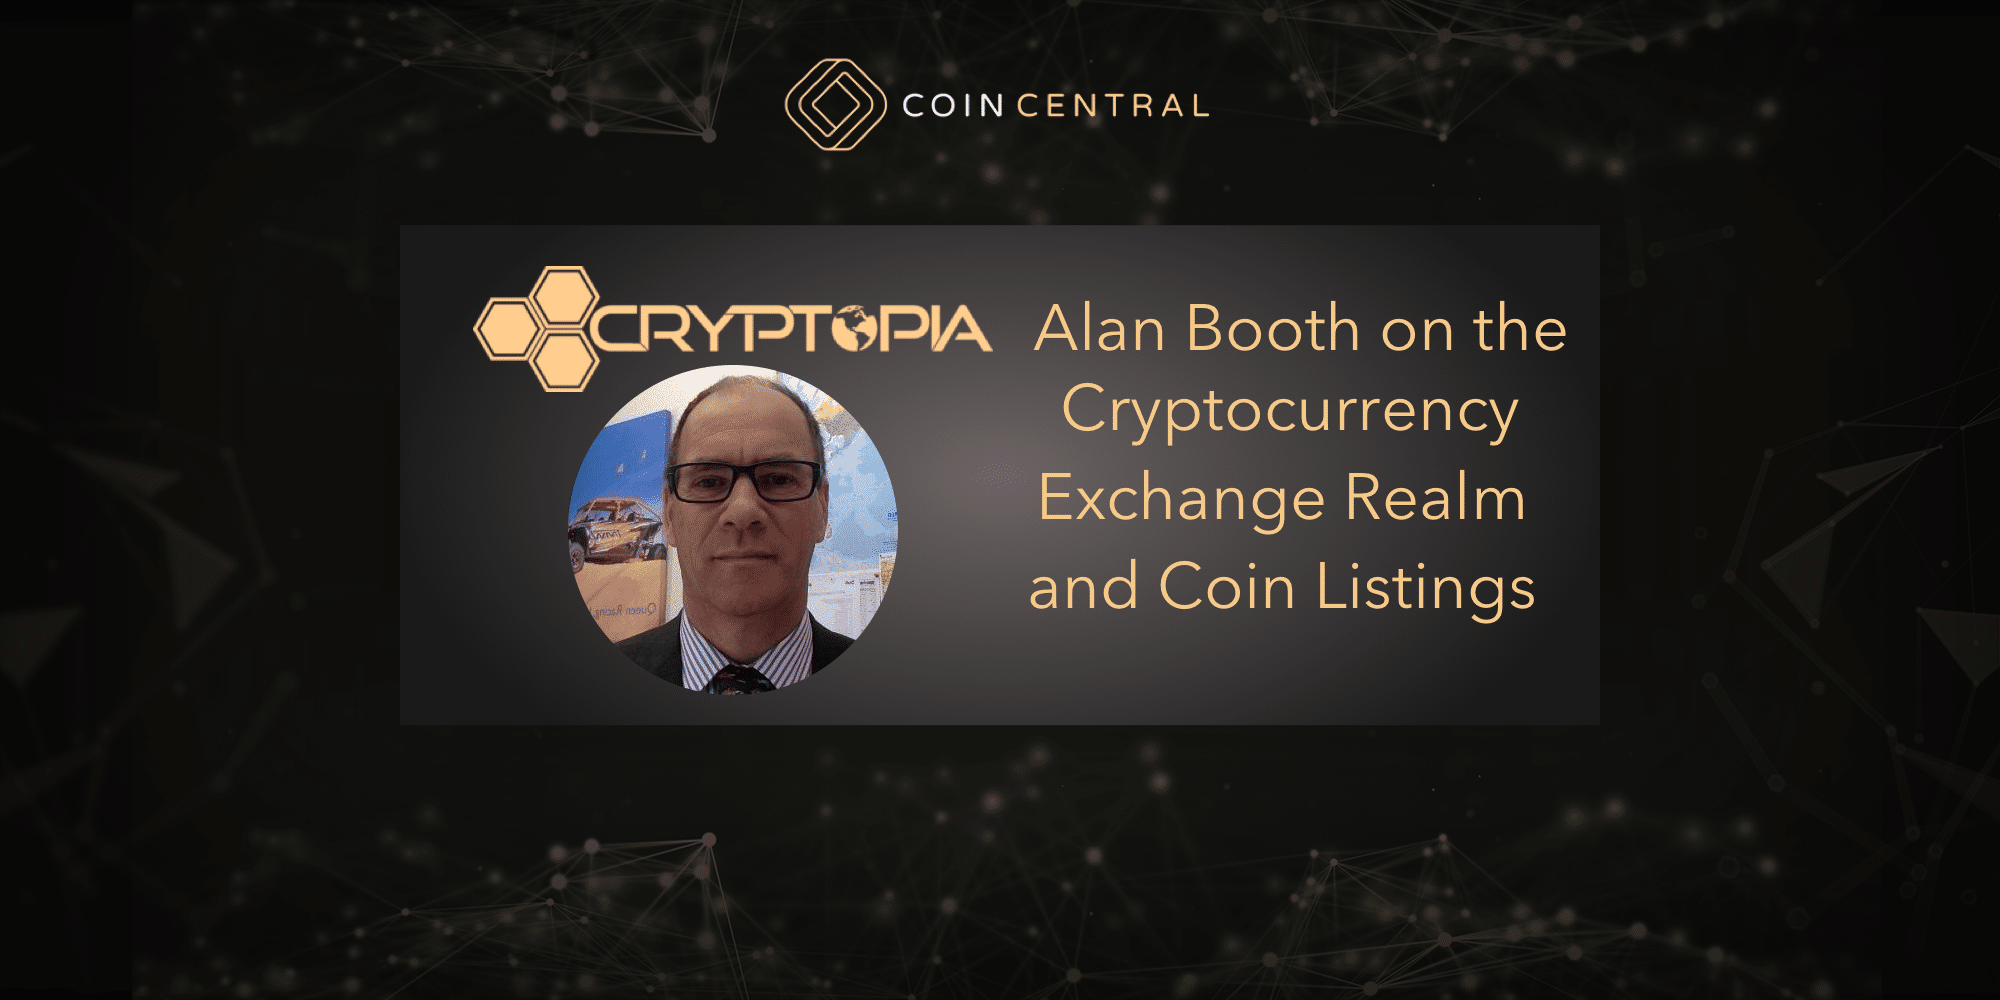 Cryptopia CEO Alan Booth on the Cryptocurrency Exchange Realm